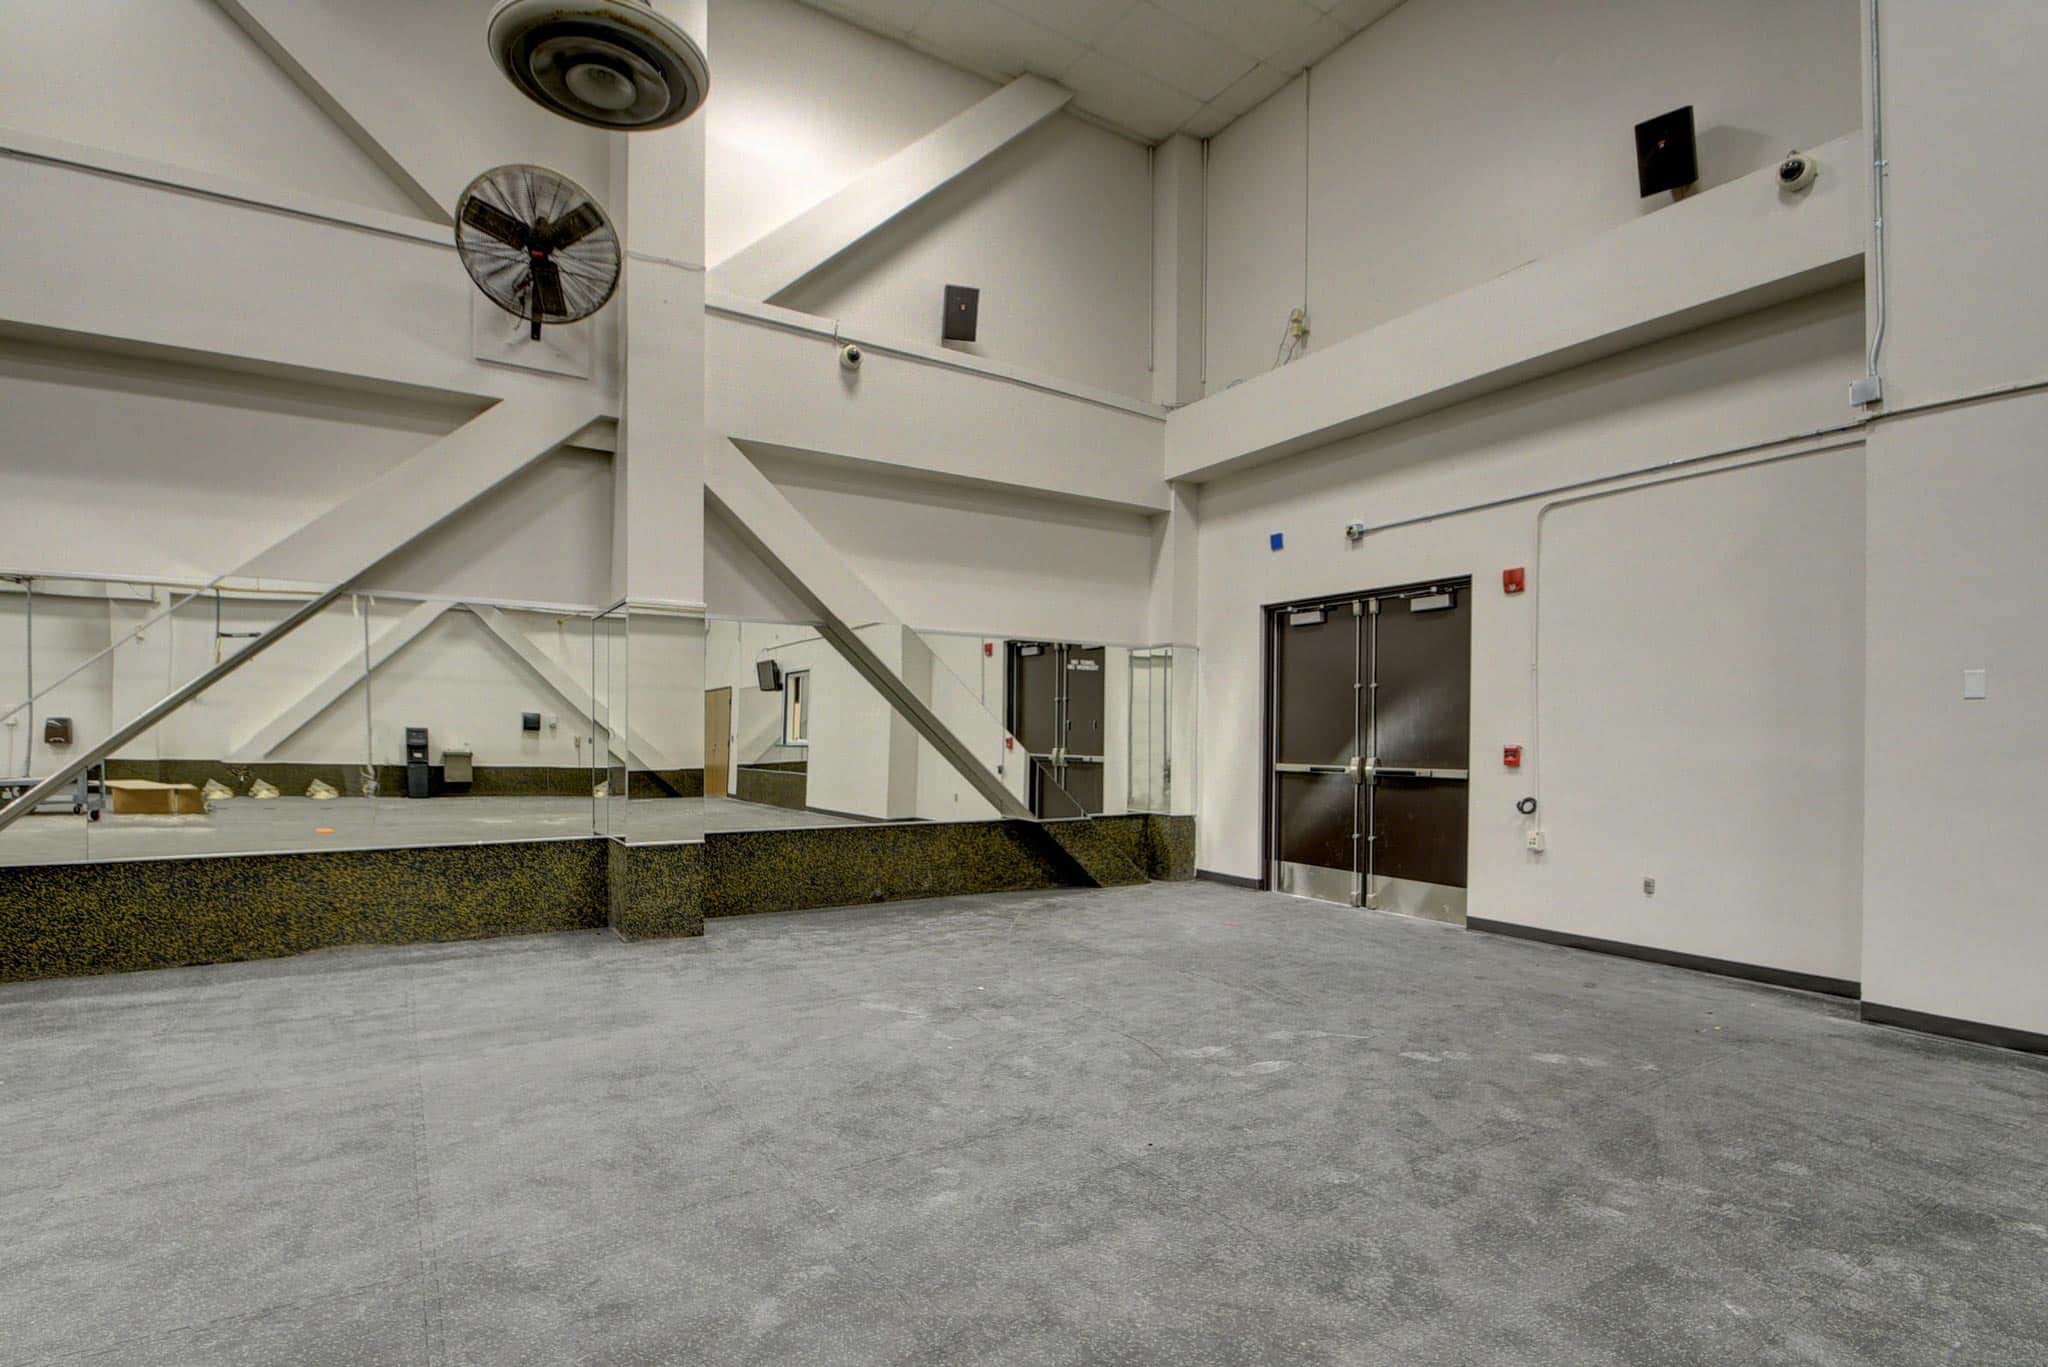 Garage area with concrete vinyl flooring at the Palm Beach Sheriff's Office next to mirrored walls.